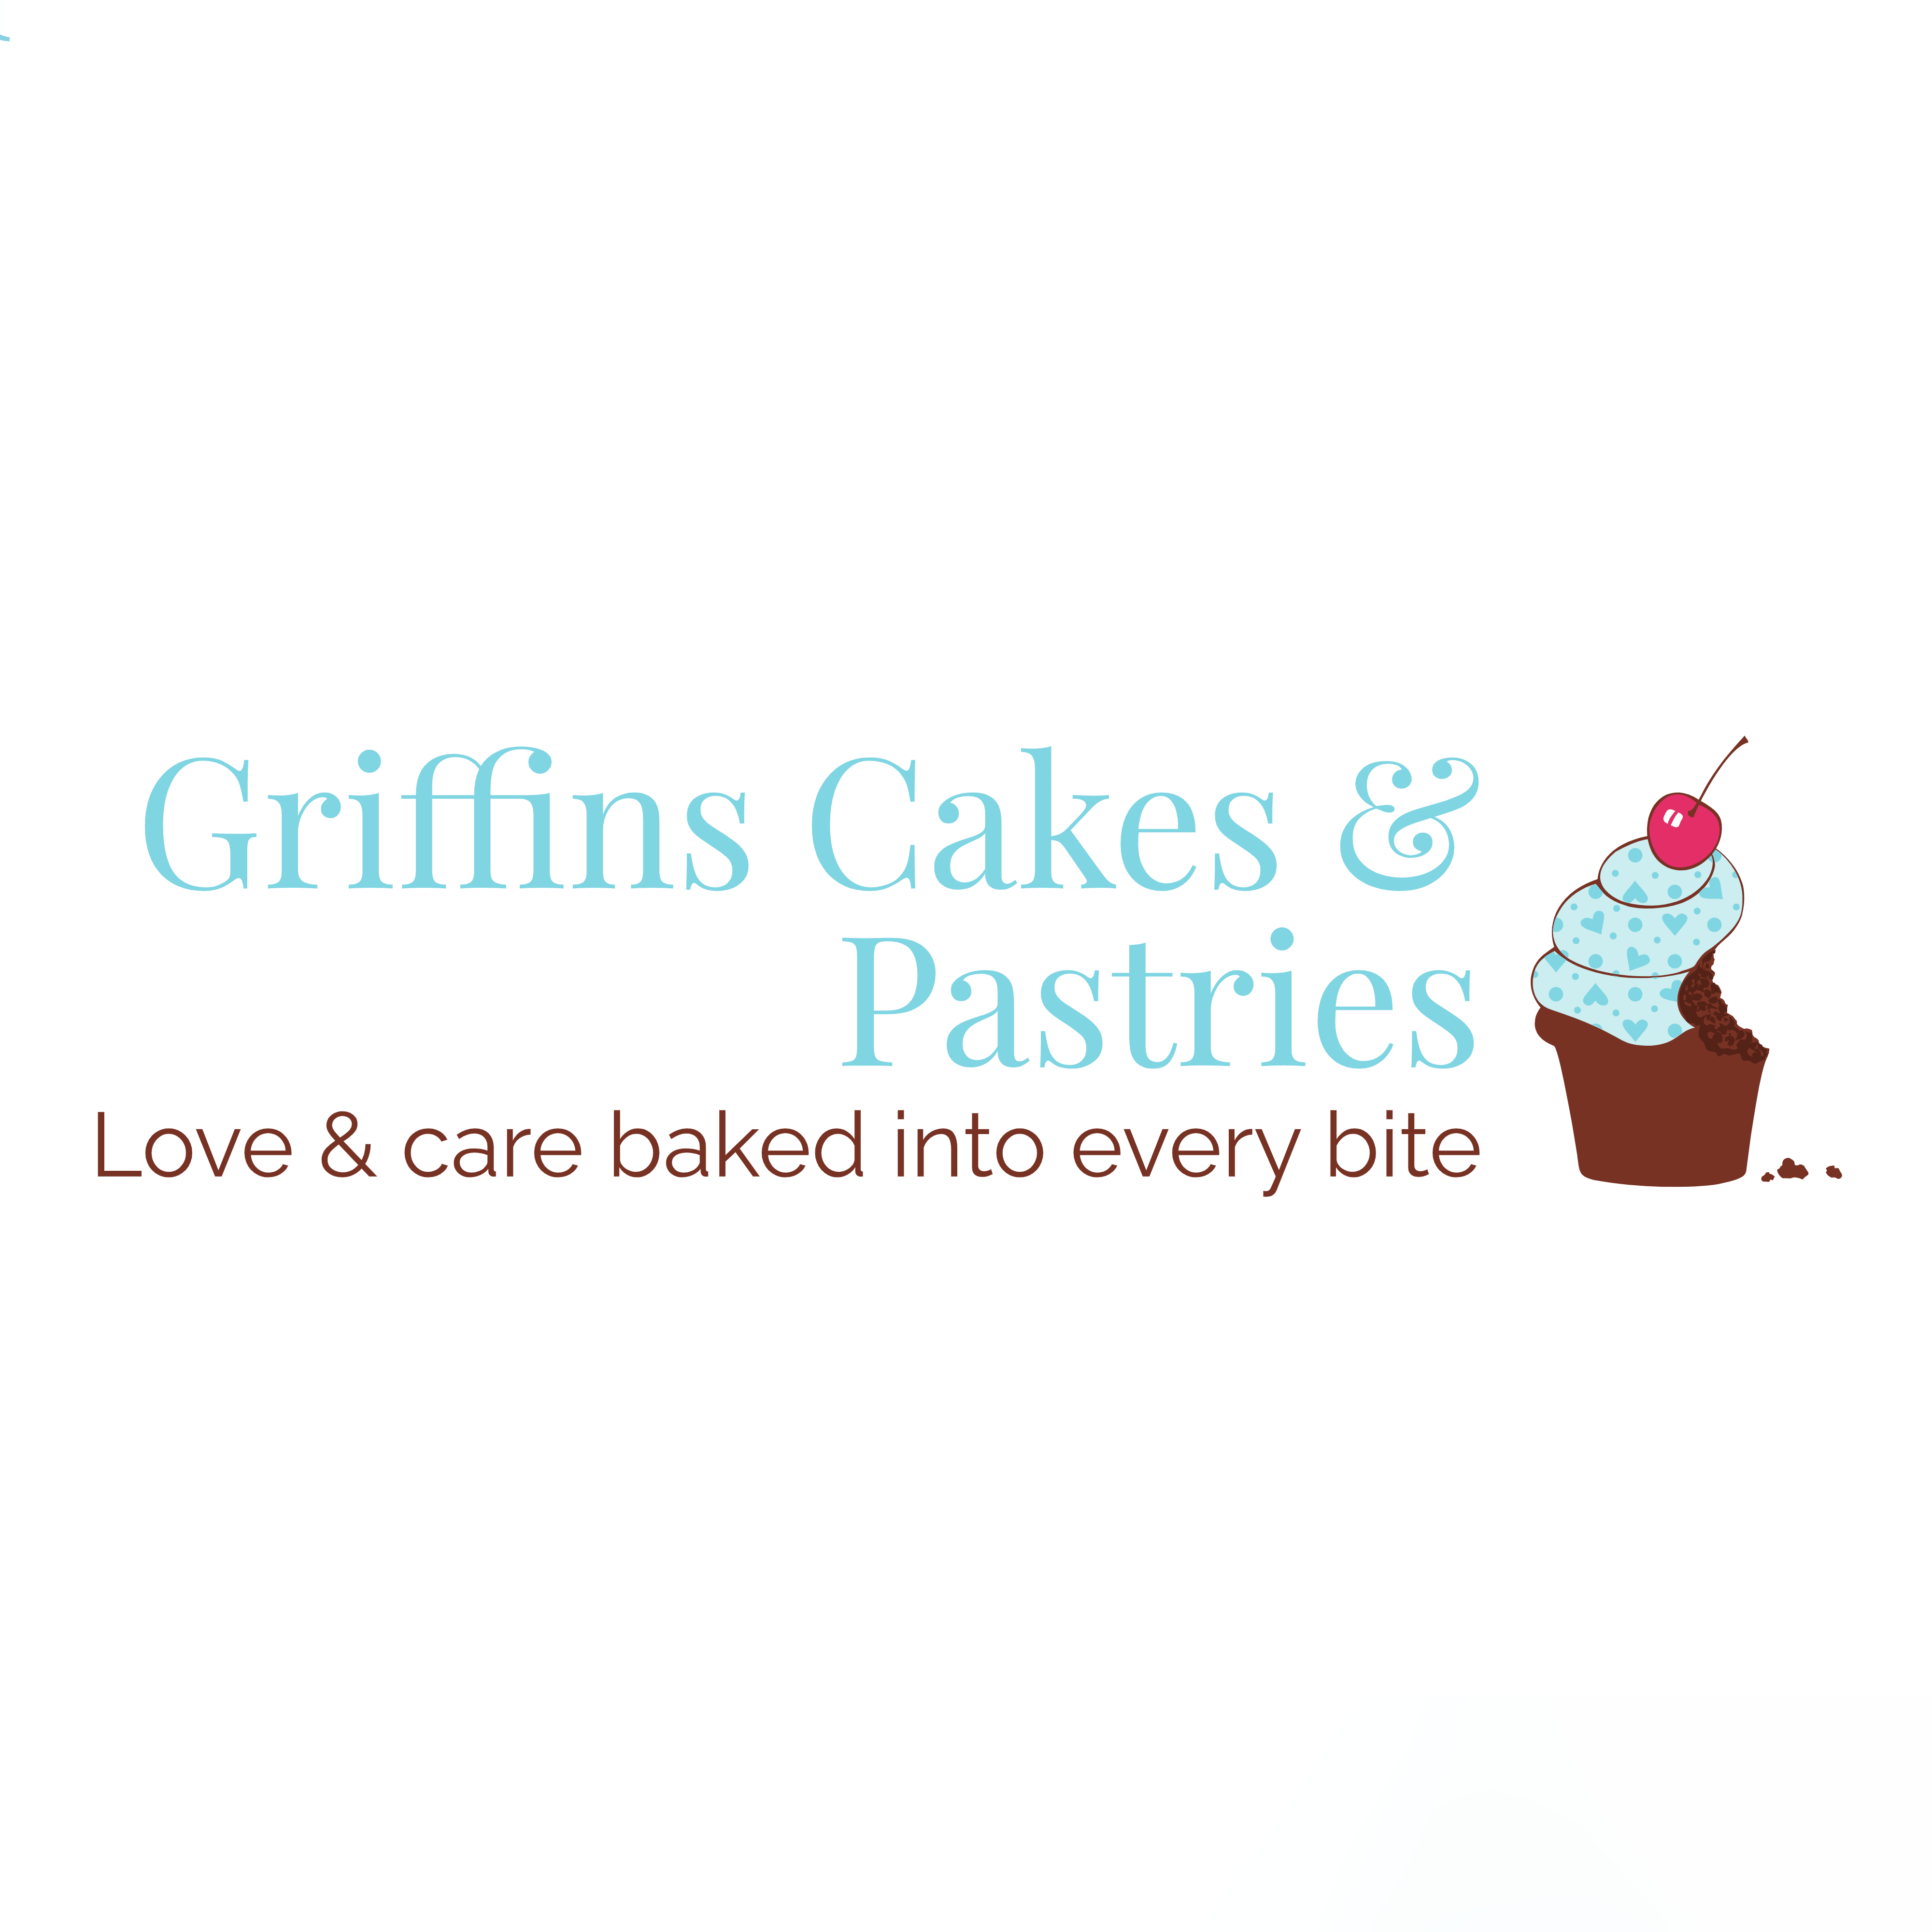 Griffins Cakes and Pastries